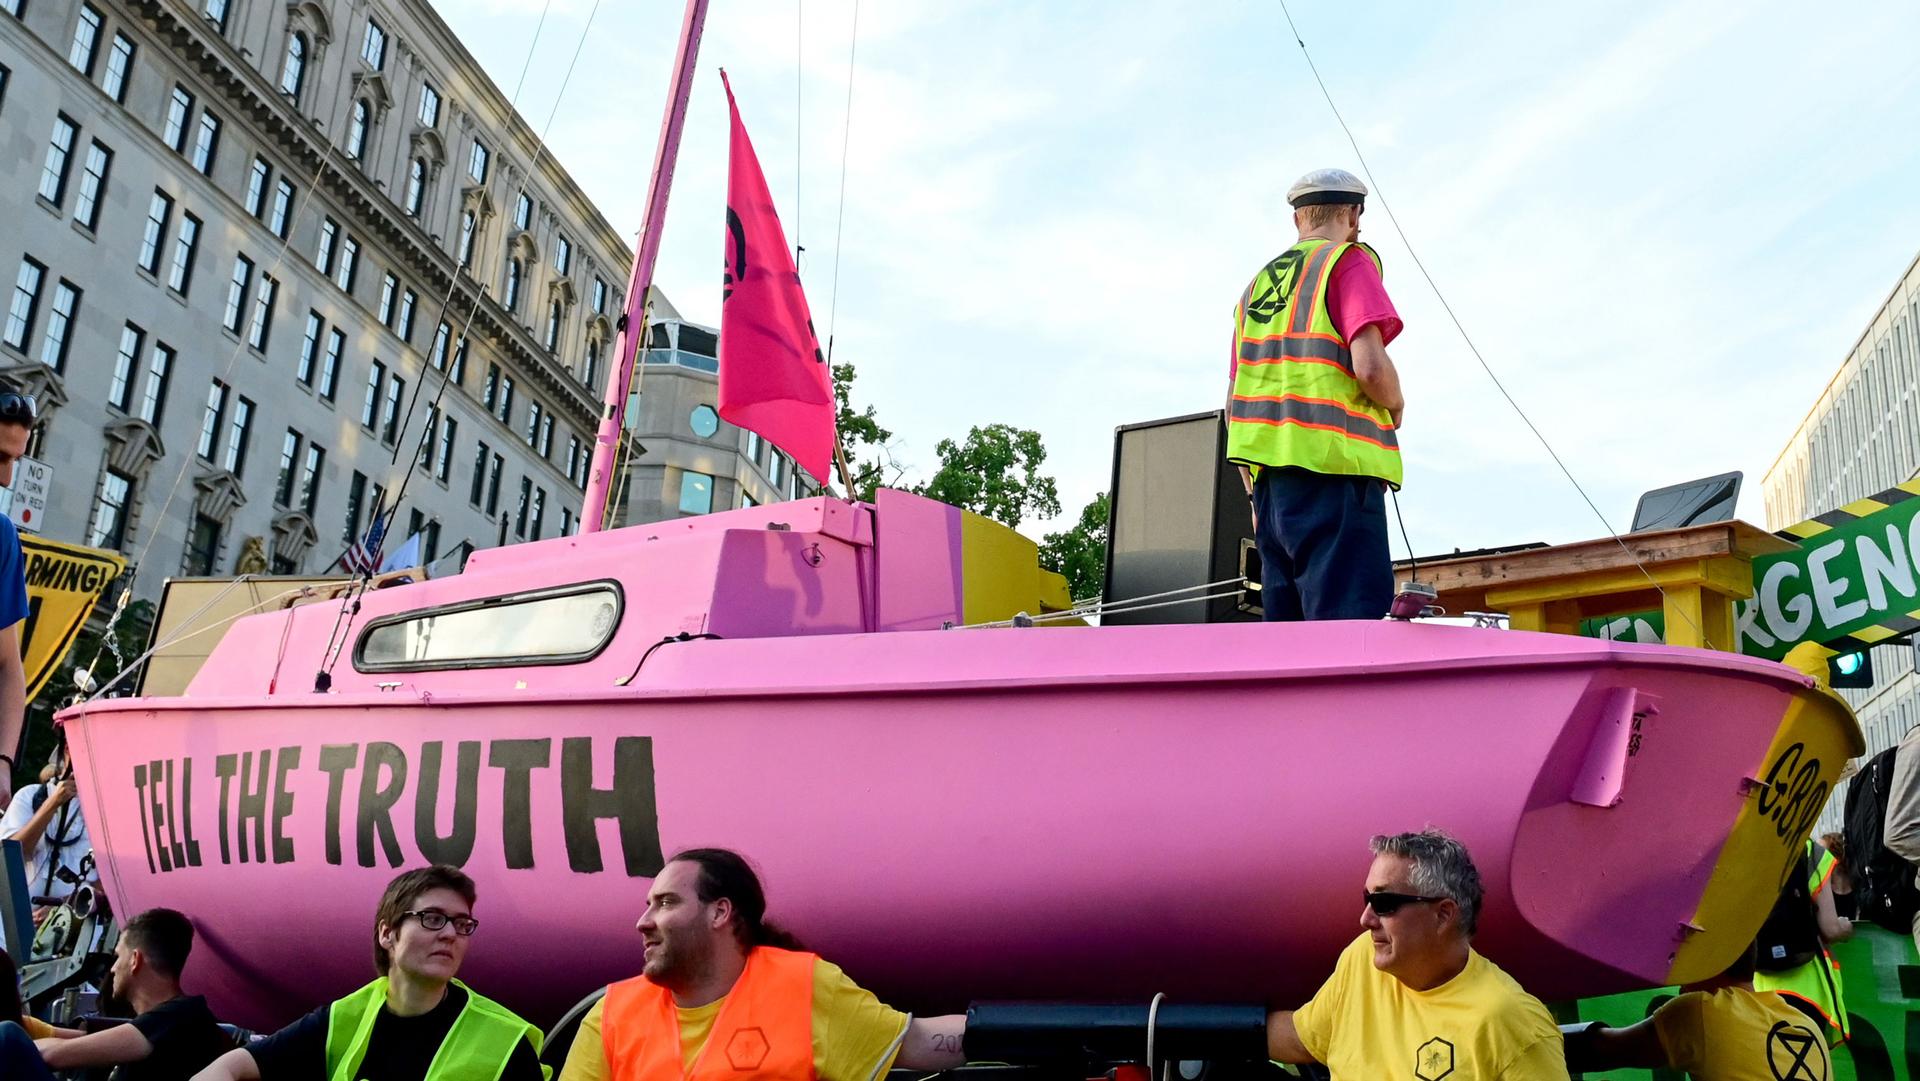 A sailboat is shown painted pink with the words, "Tell the Truth," written on the side.